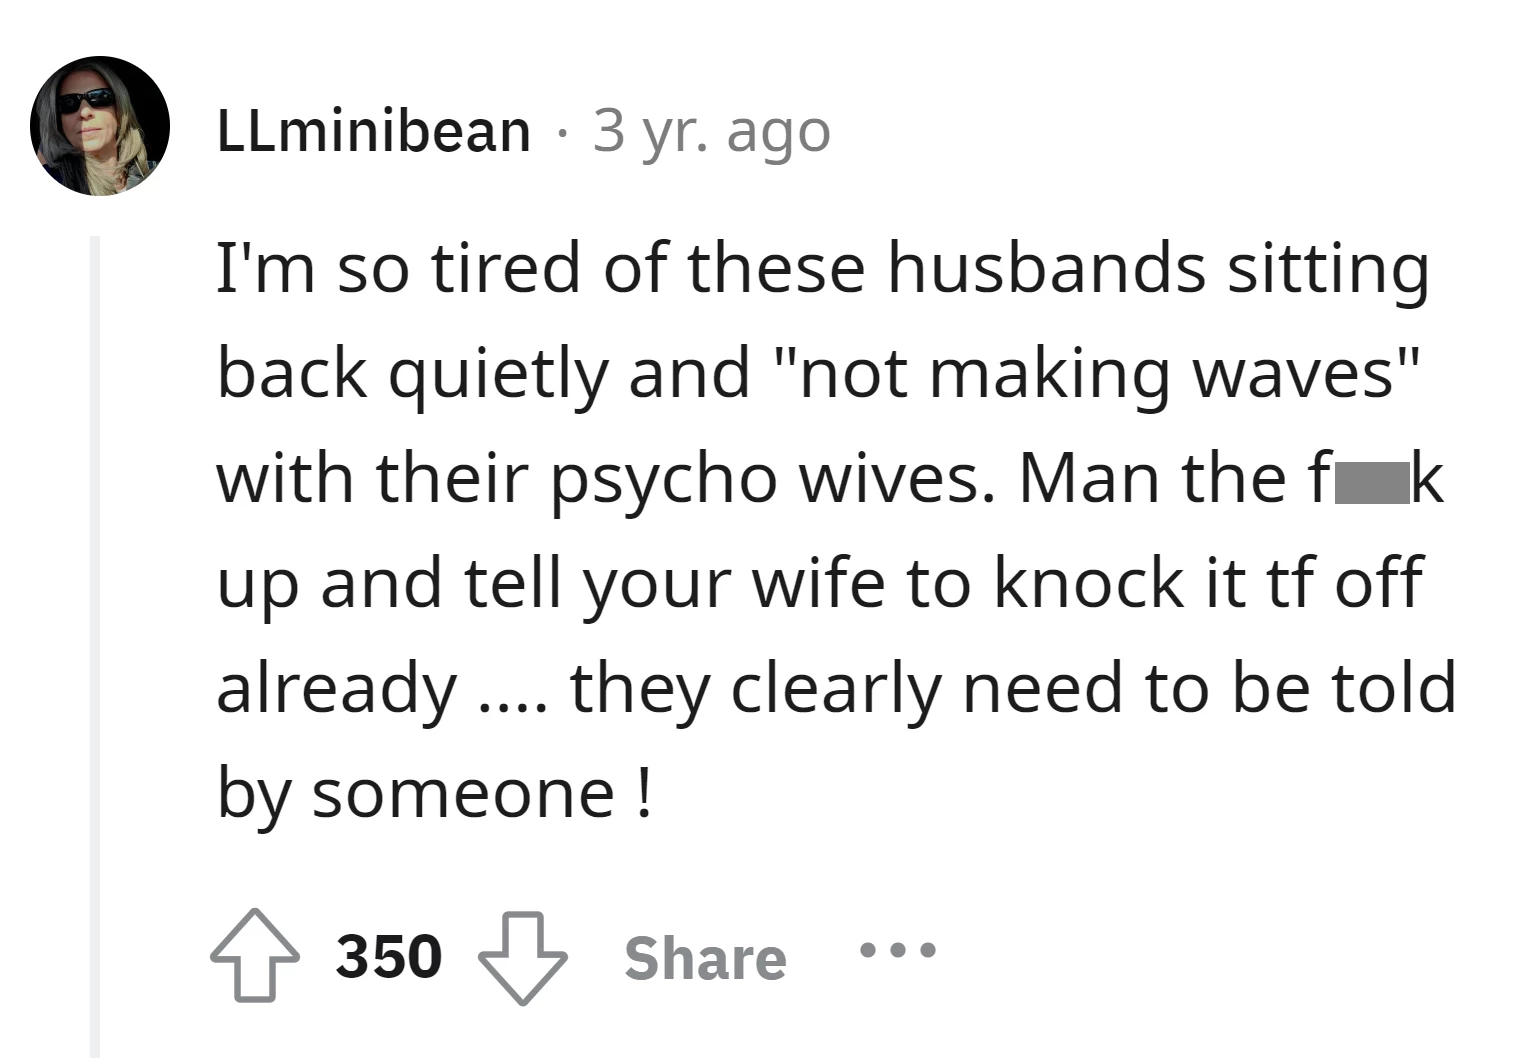 Why did the husband stay silent when her husband behaved irrationally